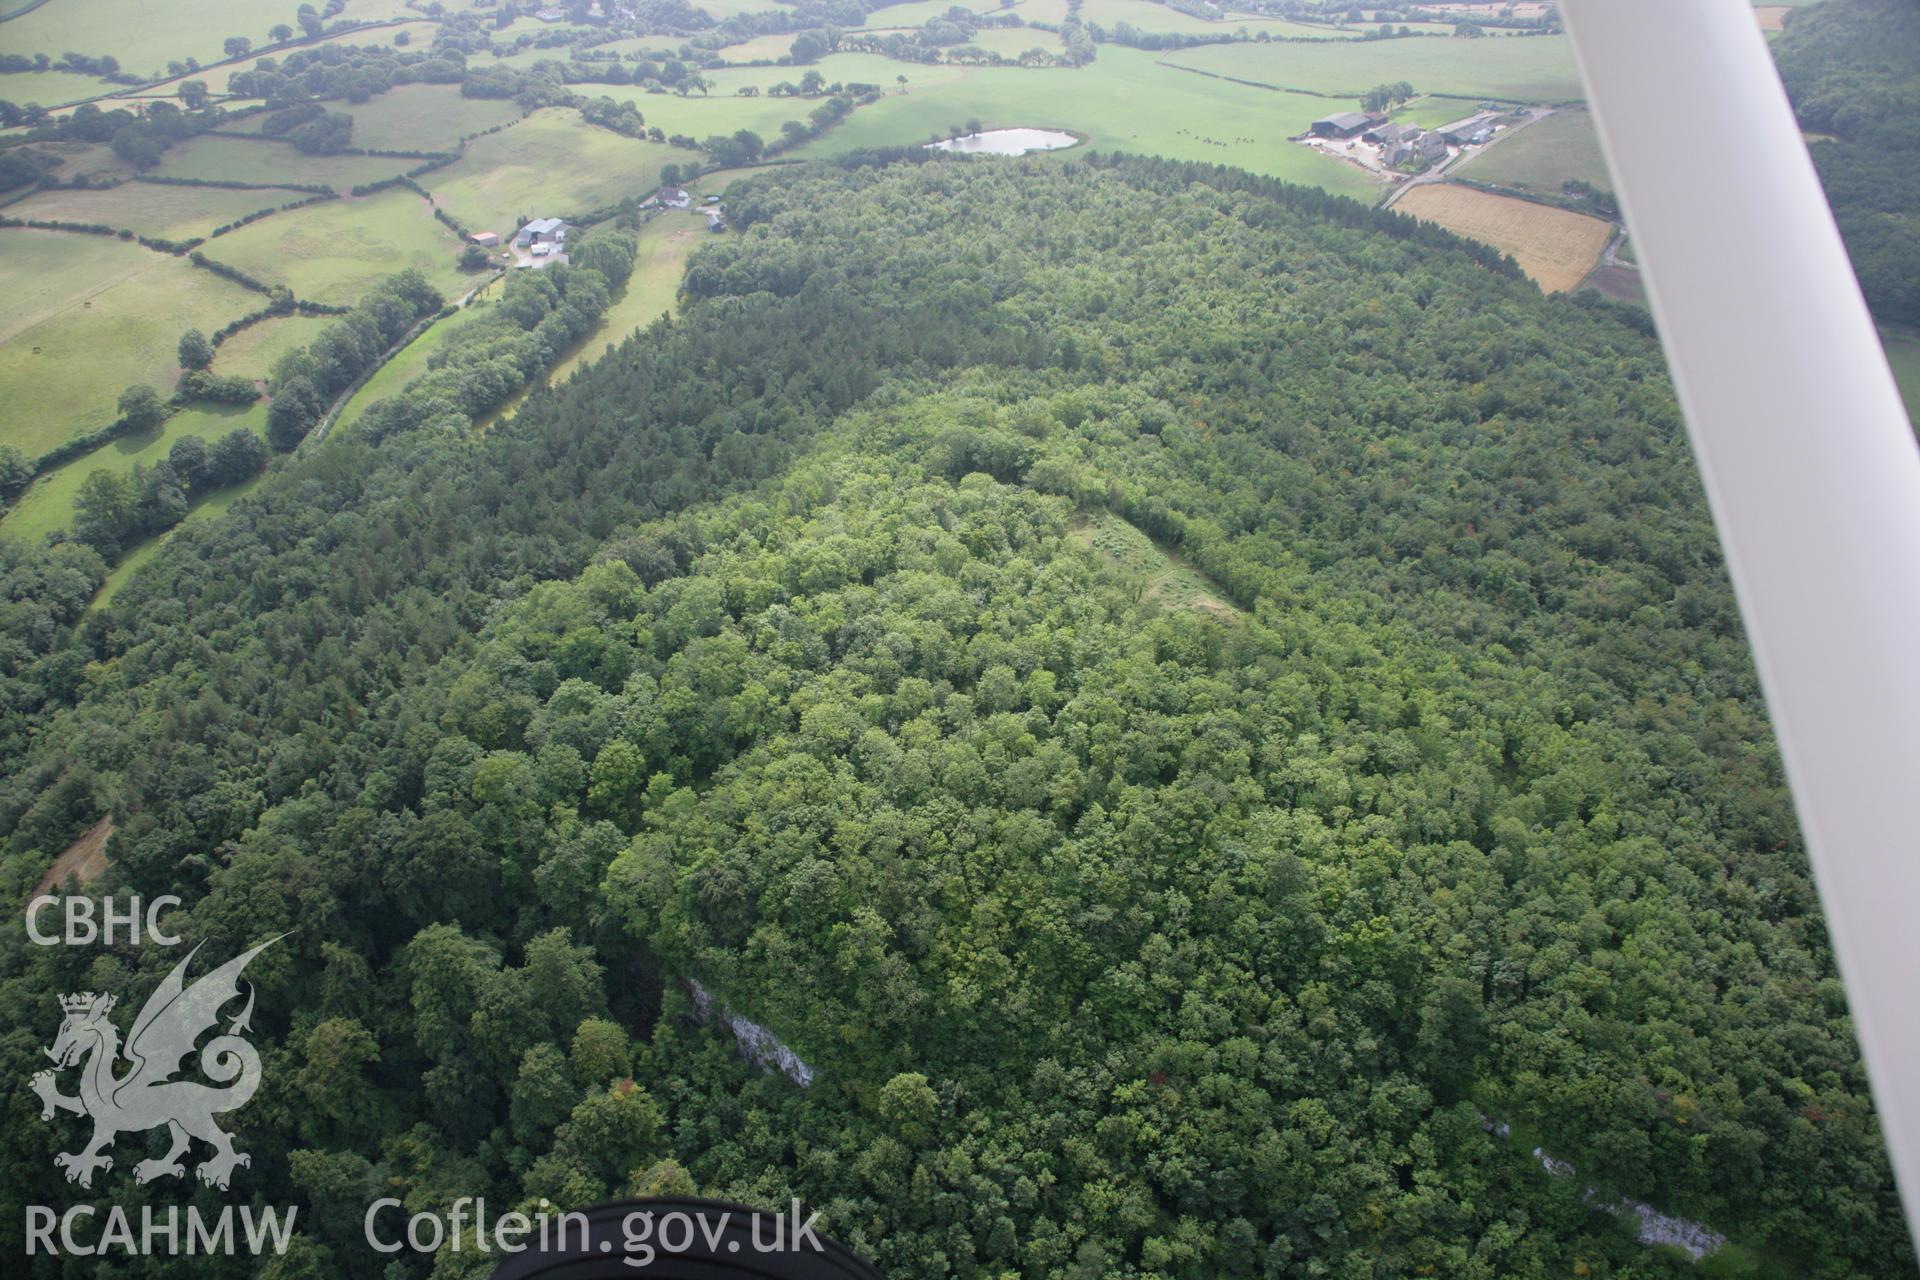 RCAHMW colour oblique aerial photograph of Castell Cawr. Taken on 14 August 2006 by Toby Driver.